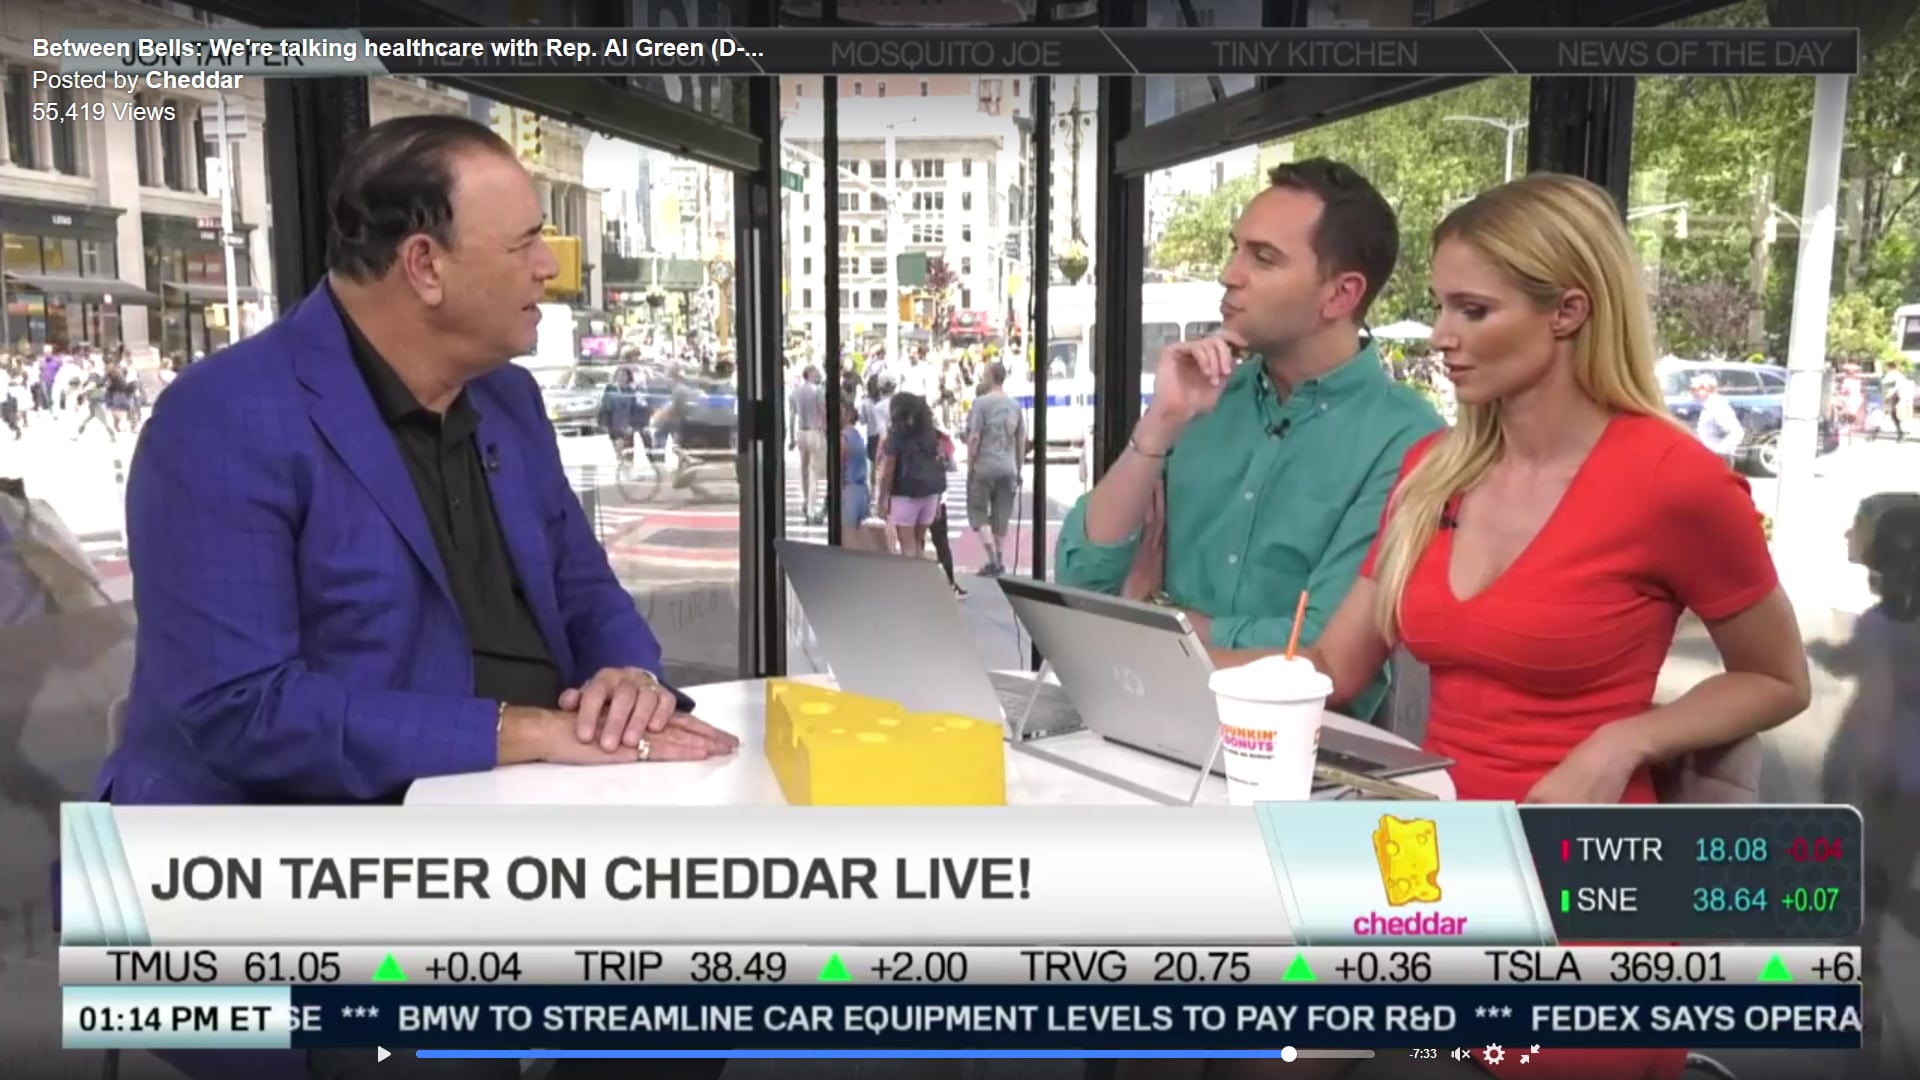 Jon Taffer on Cheddar: What to expect from Season 5 of Bar Rescue